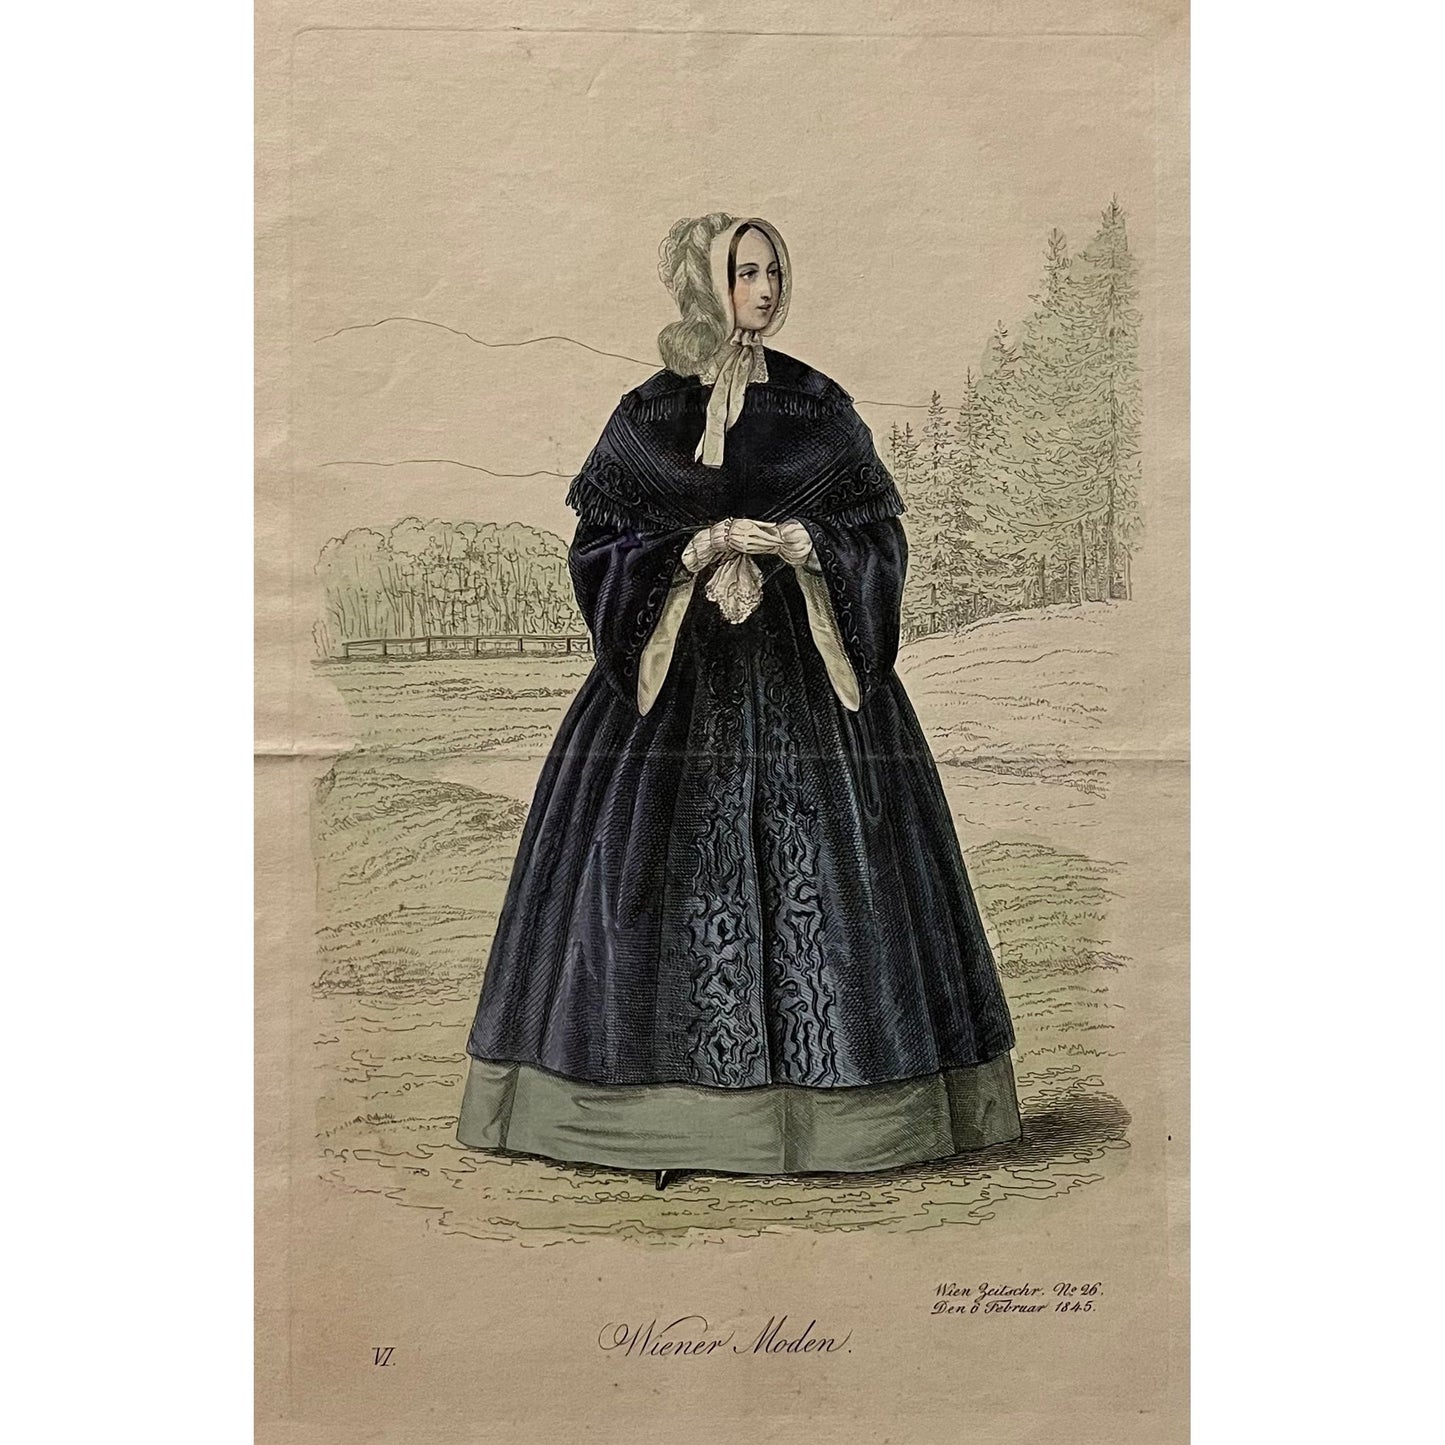 Original antique coloured print of Viennese fashion plate from Wiener Moden for sale by Victoria Cooper Antique Prints